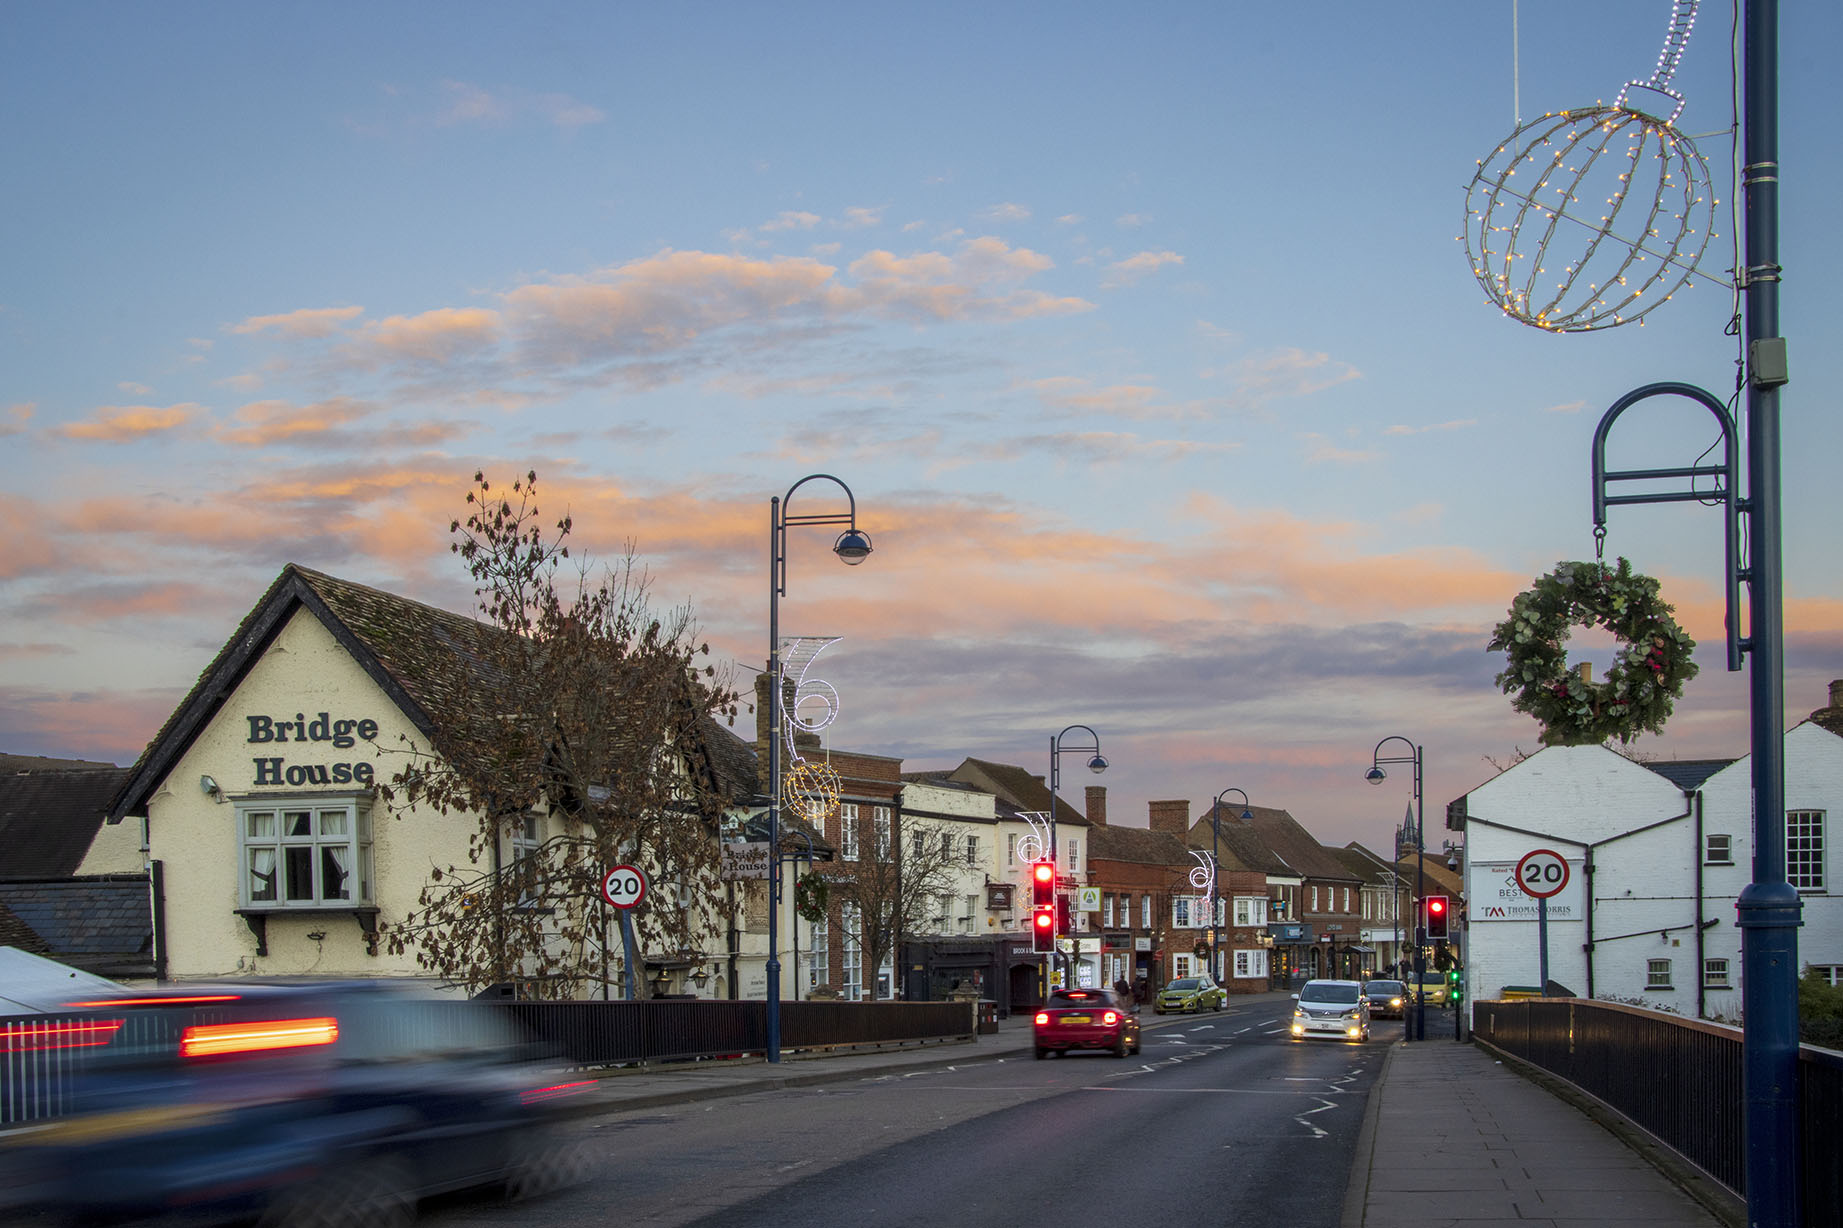 St Neots town bridge with the bridge hotel and a beautiful sunset sky. High quality photo